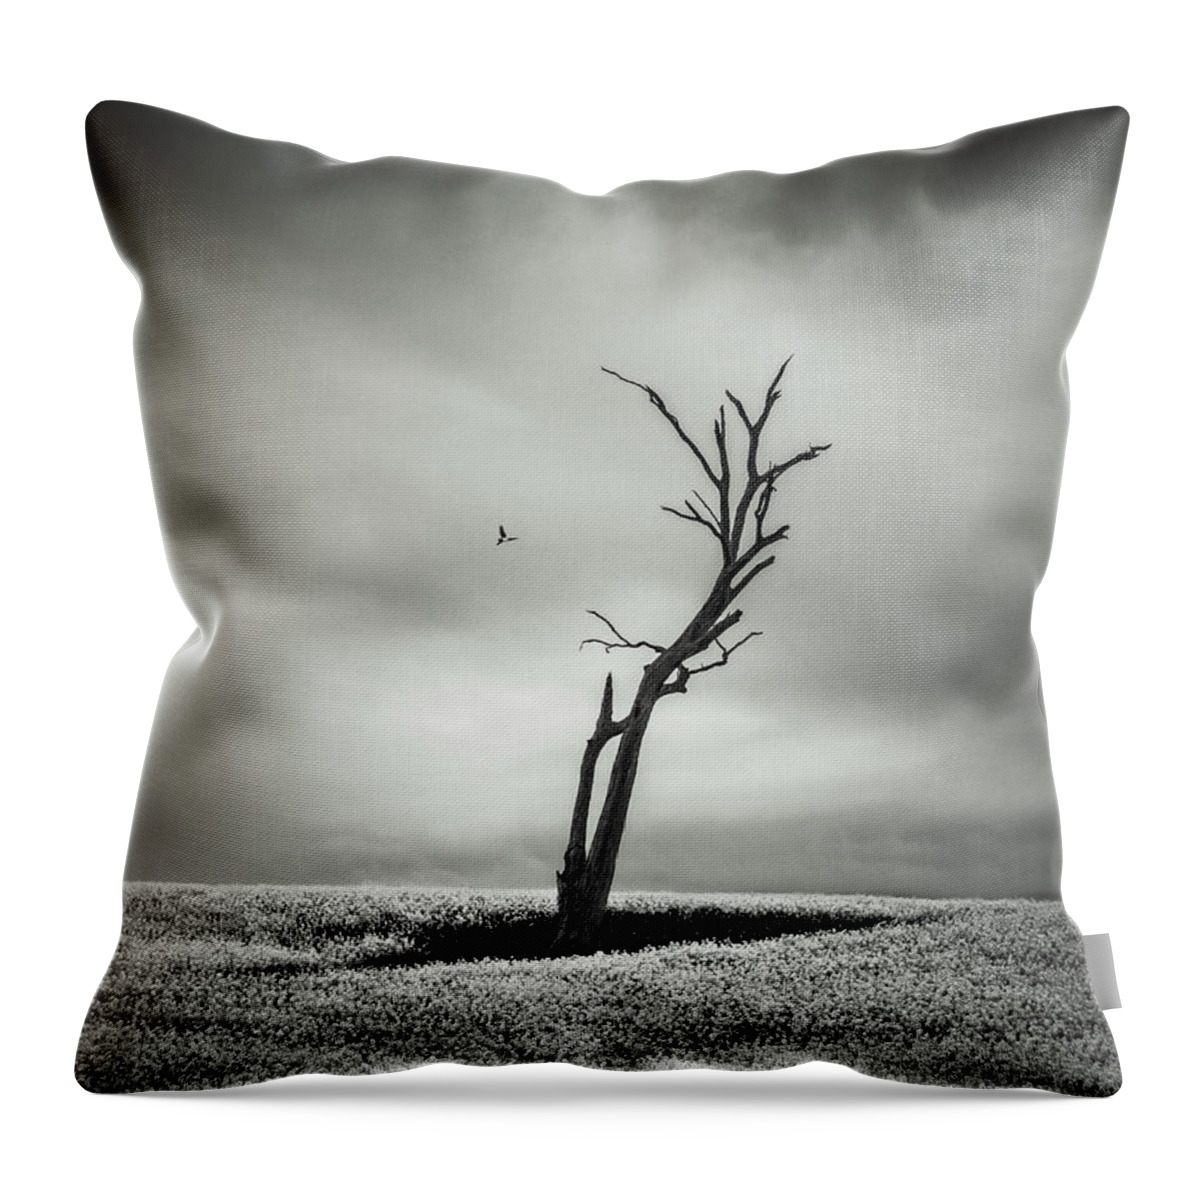 Monochrome Throw Pillow featuring the photograph Out West by Grant Galbraith